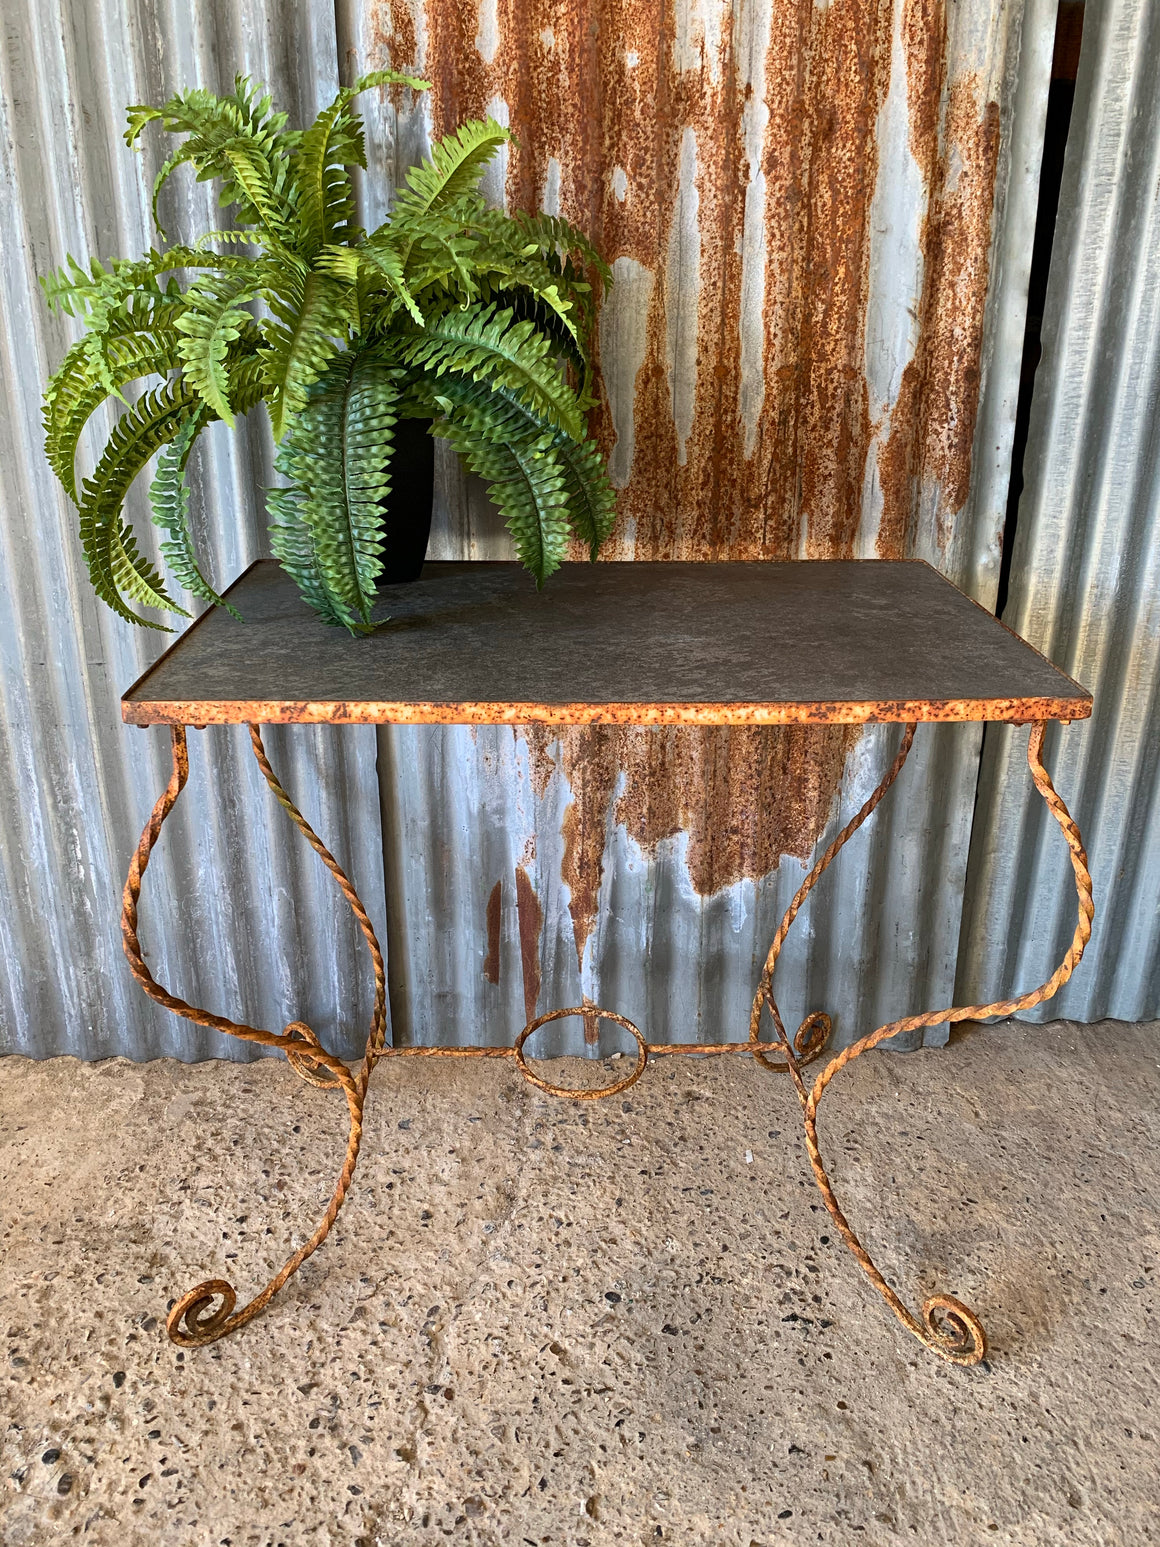 A twisted wrought iron garden table